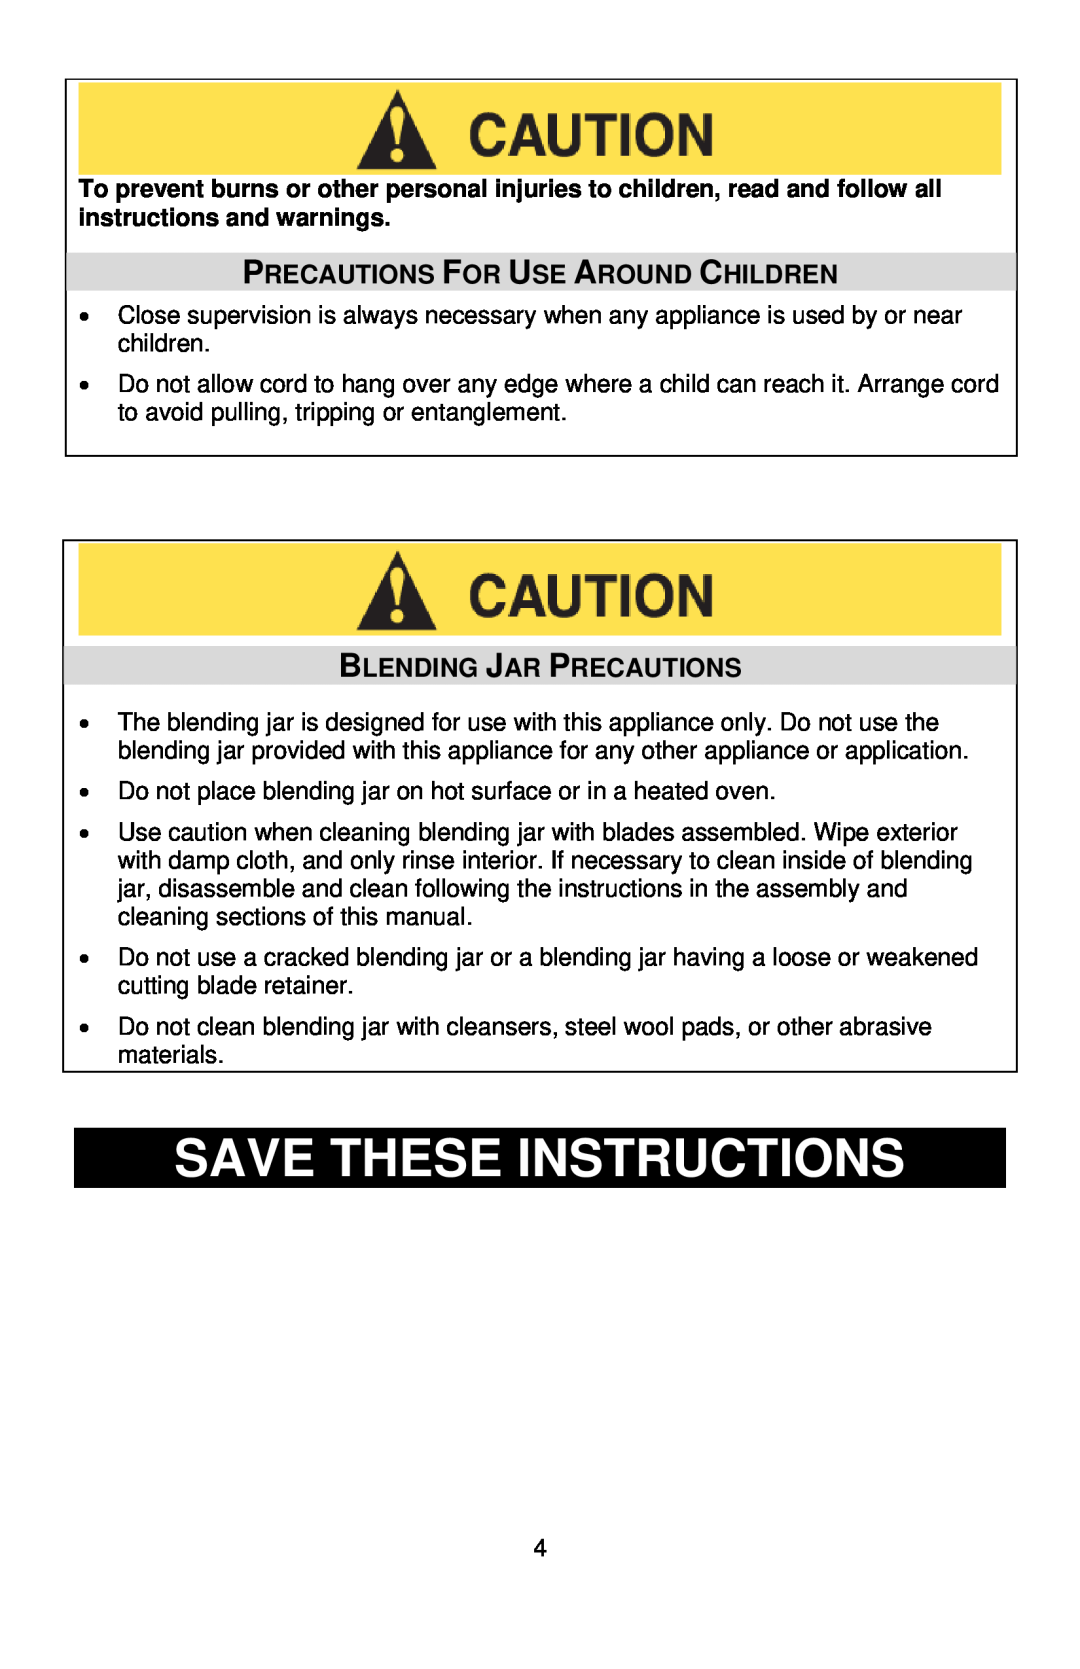 West Bend L5700 instruction manual Save These Instructions, Precautions For Use Around Children, Blending Jar Precautions 